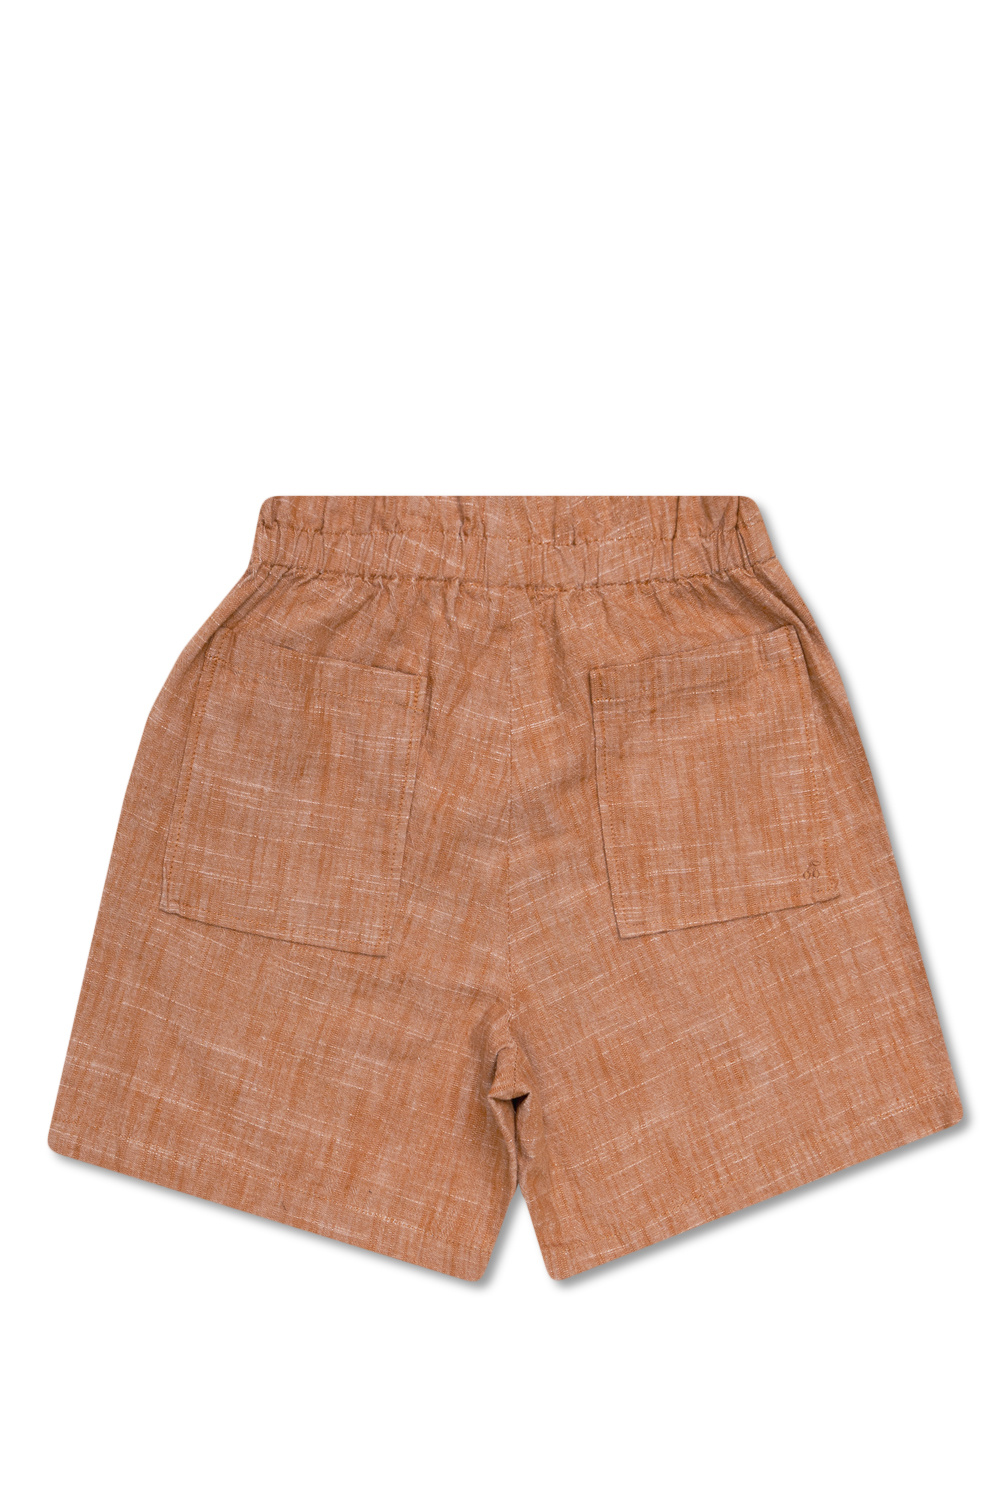 Bonpoint  shorts Relaxed with pockets